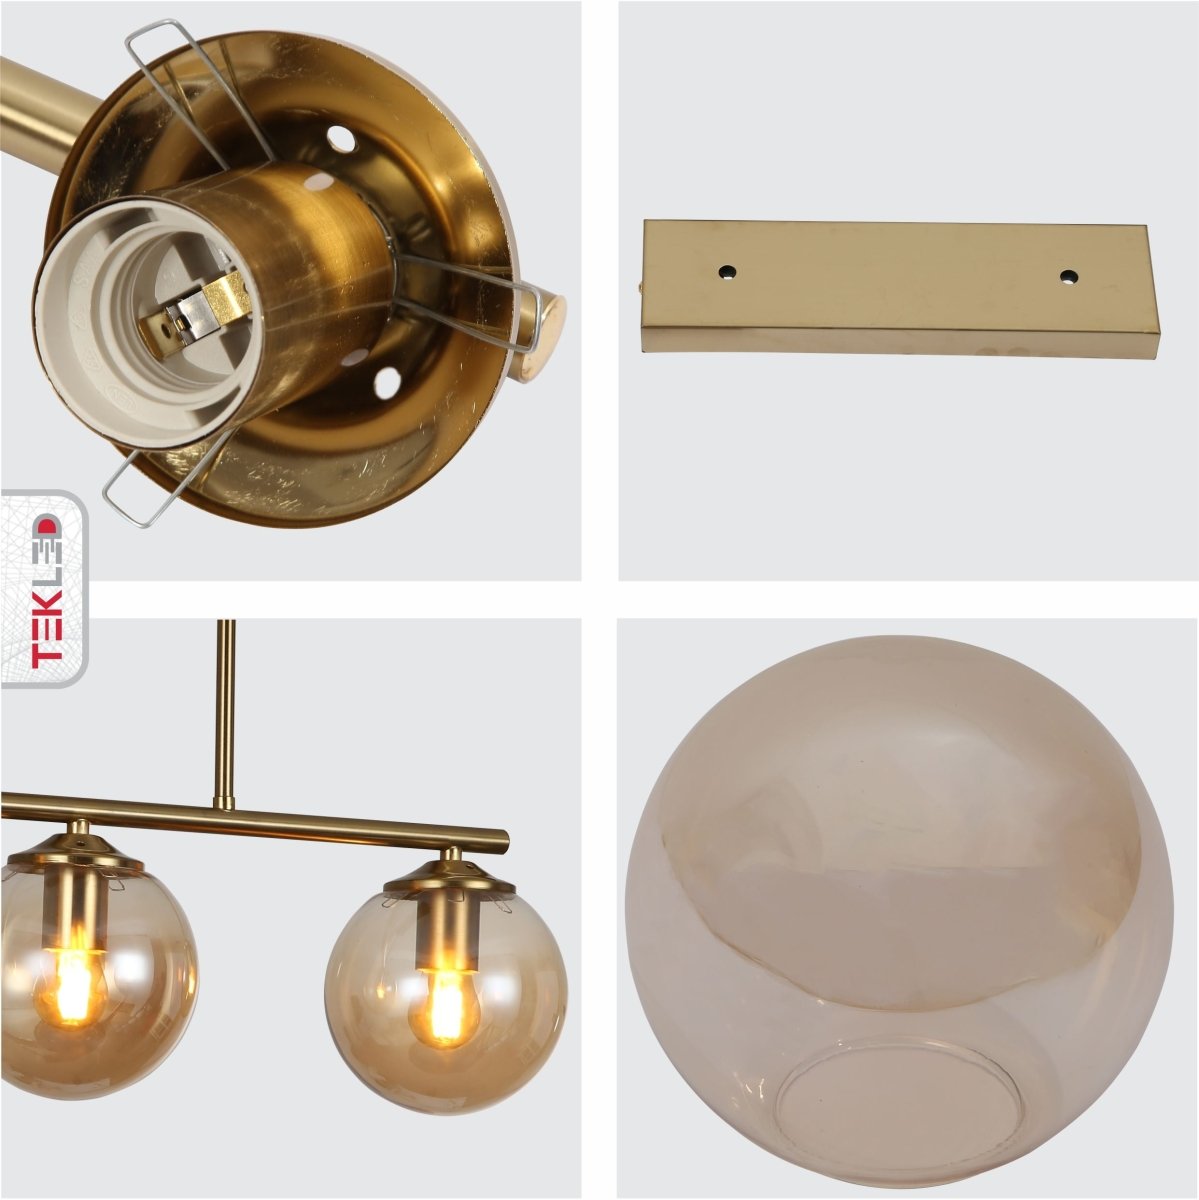 Detailed shots of Amber Globe Glass Gold Metal Body Ceiling Light with 3xE27 Fitting | TEKLED 159-17578